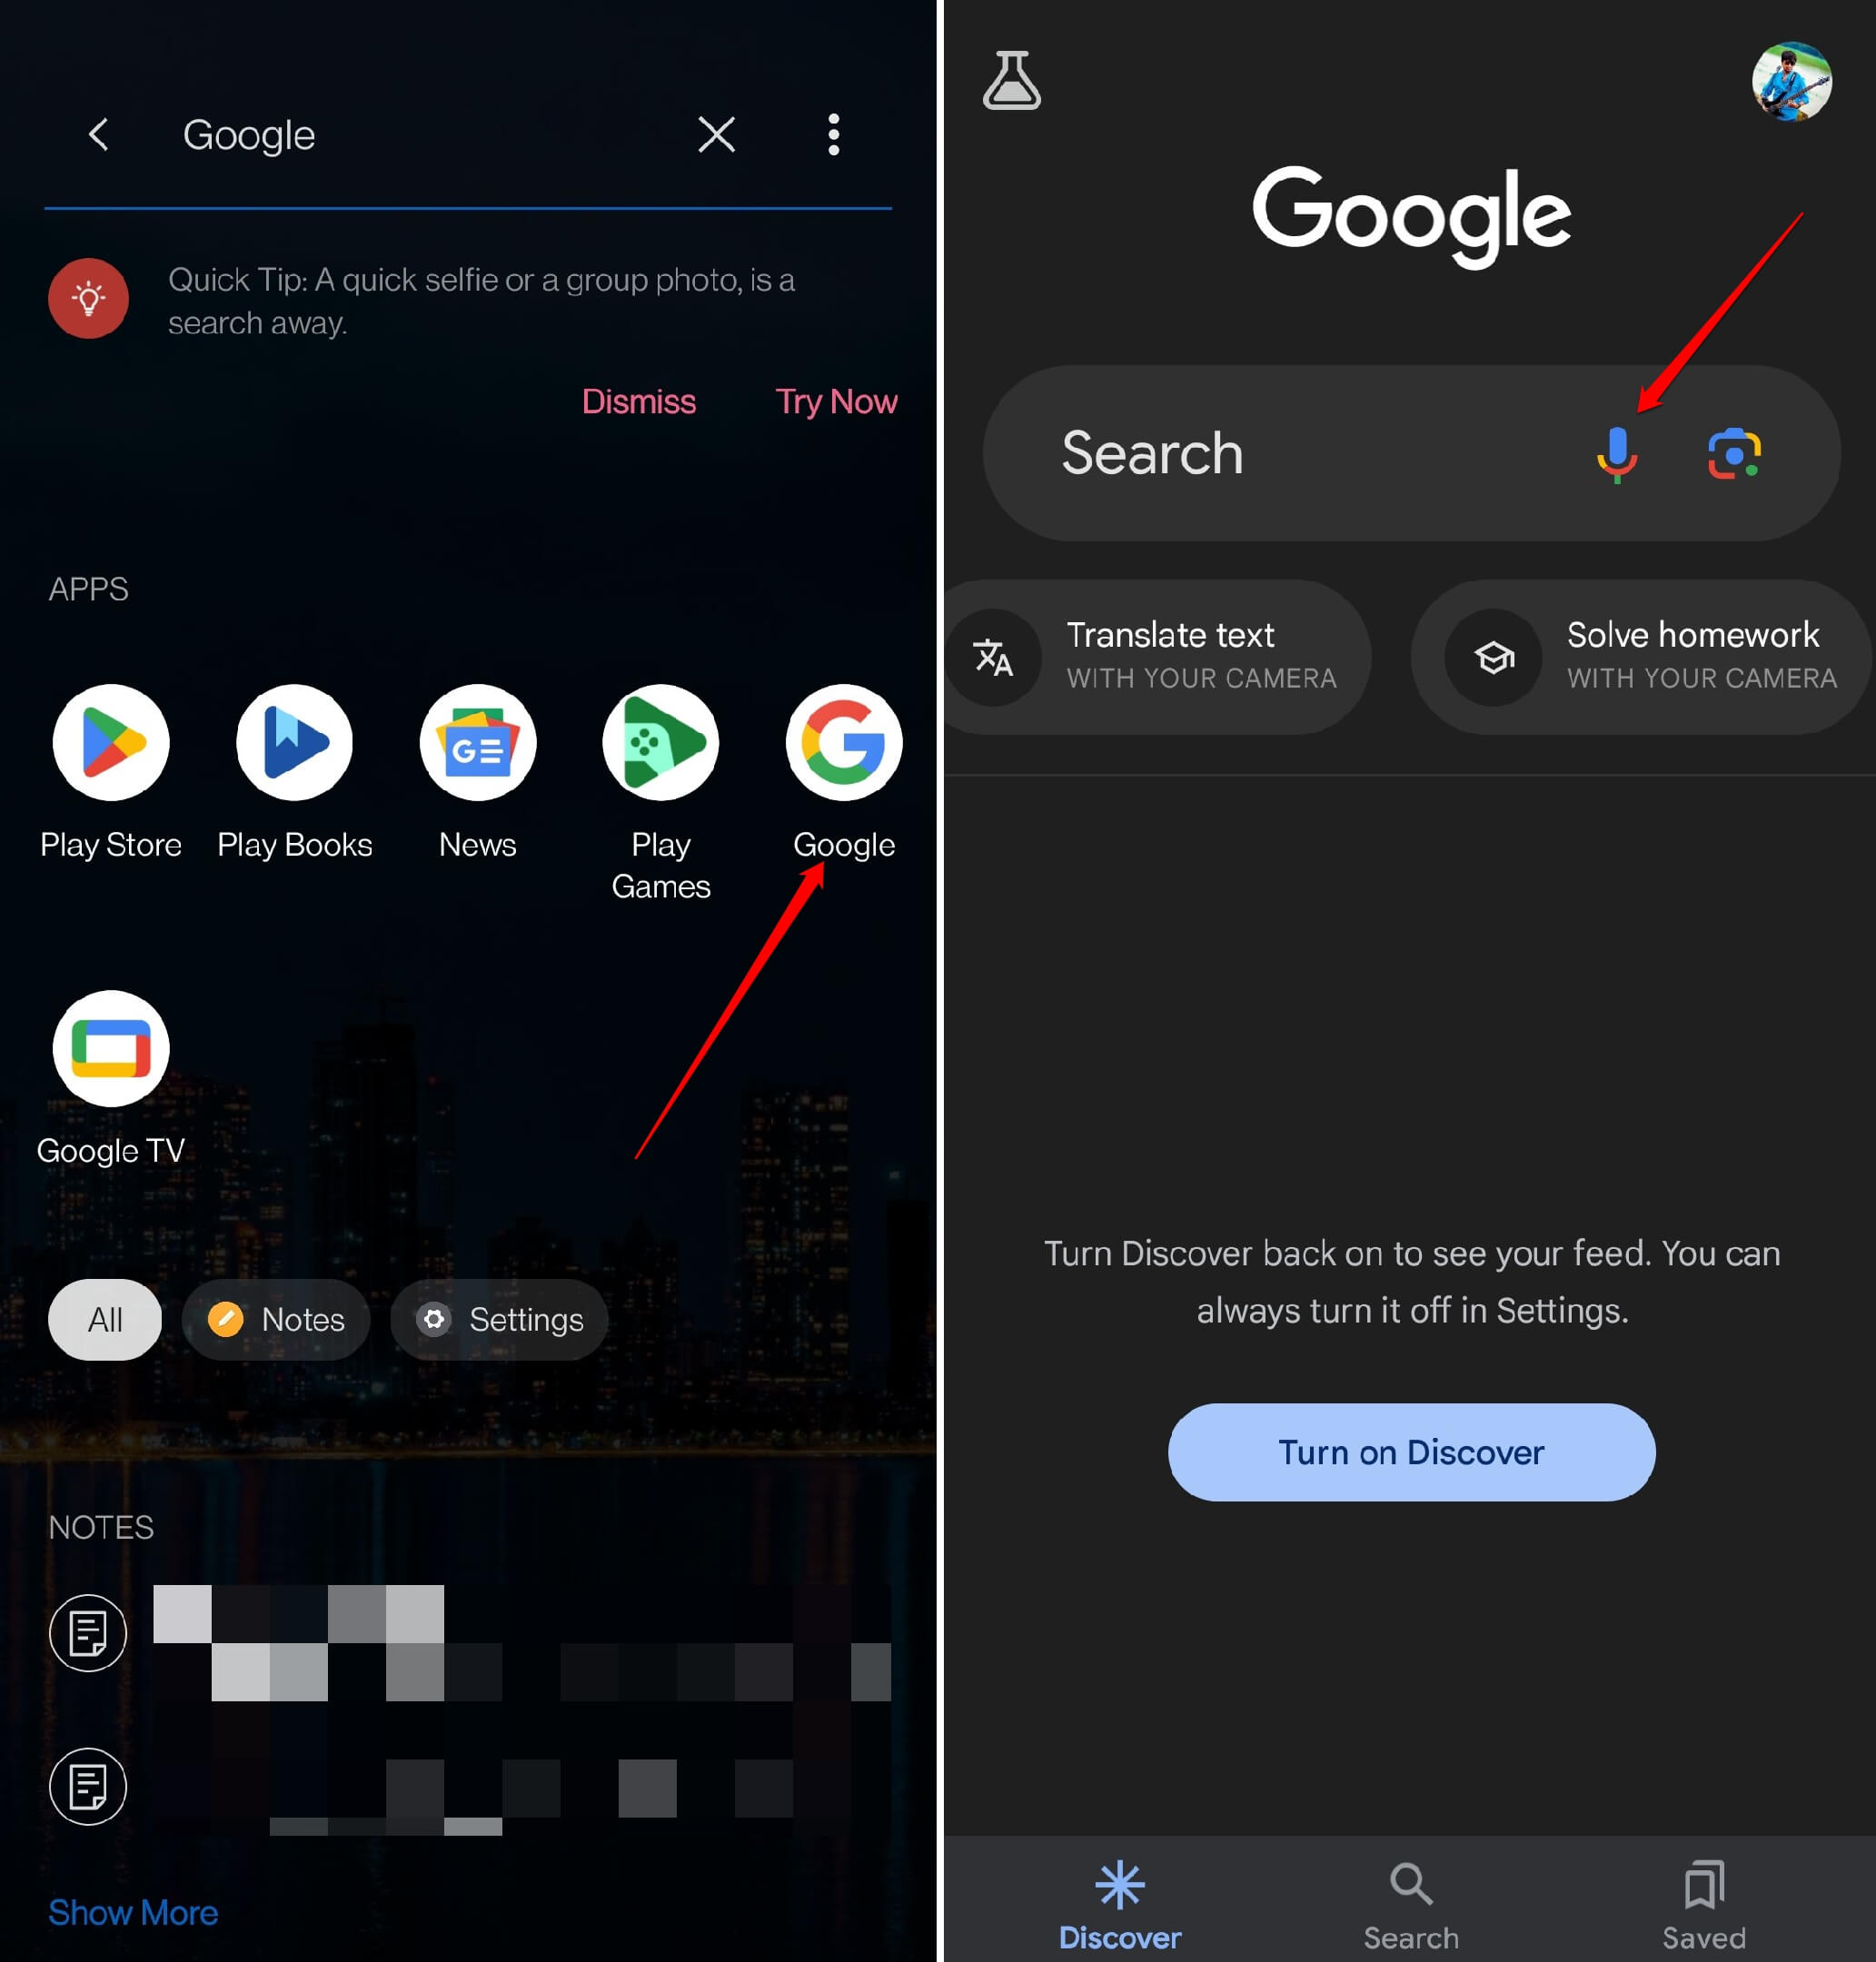 launch the Google app on your phone